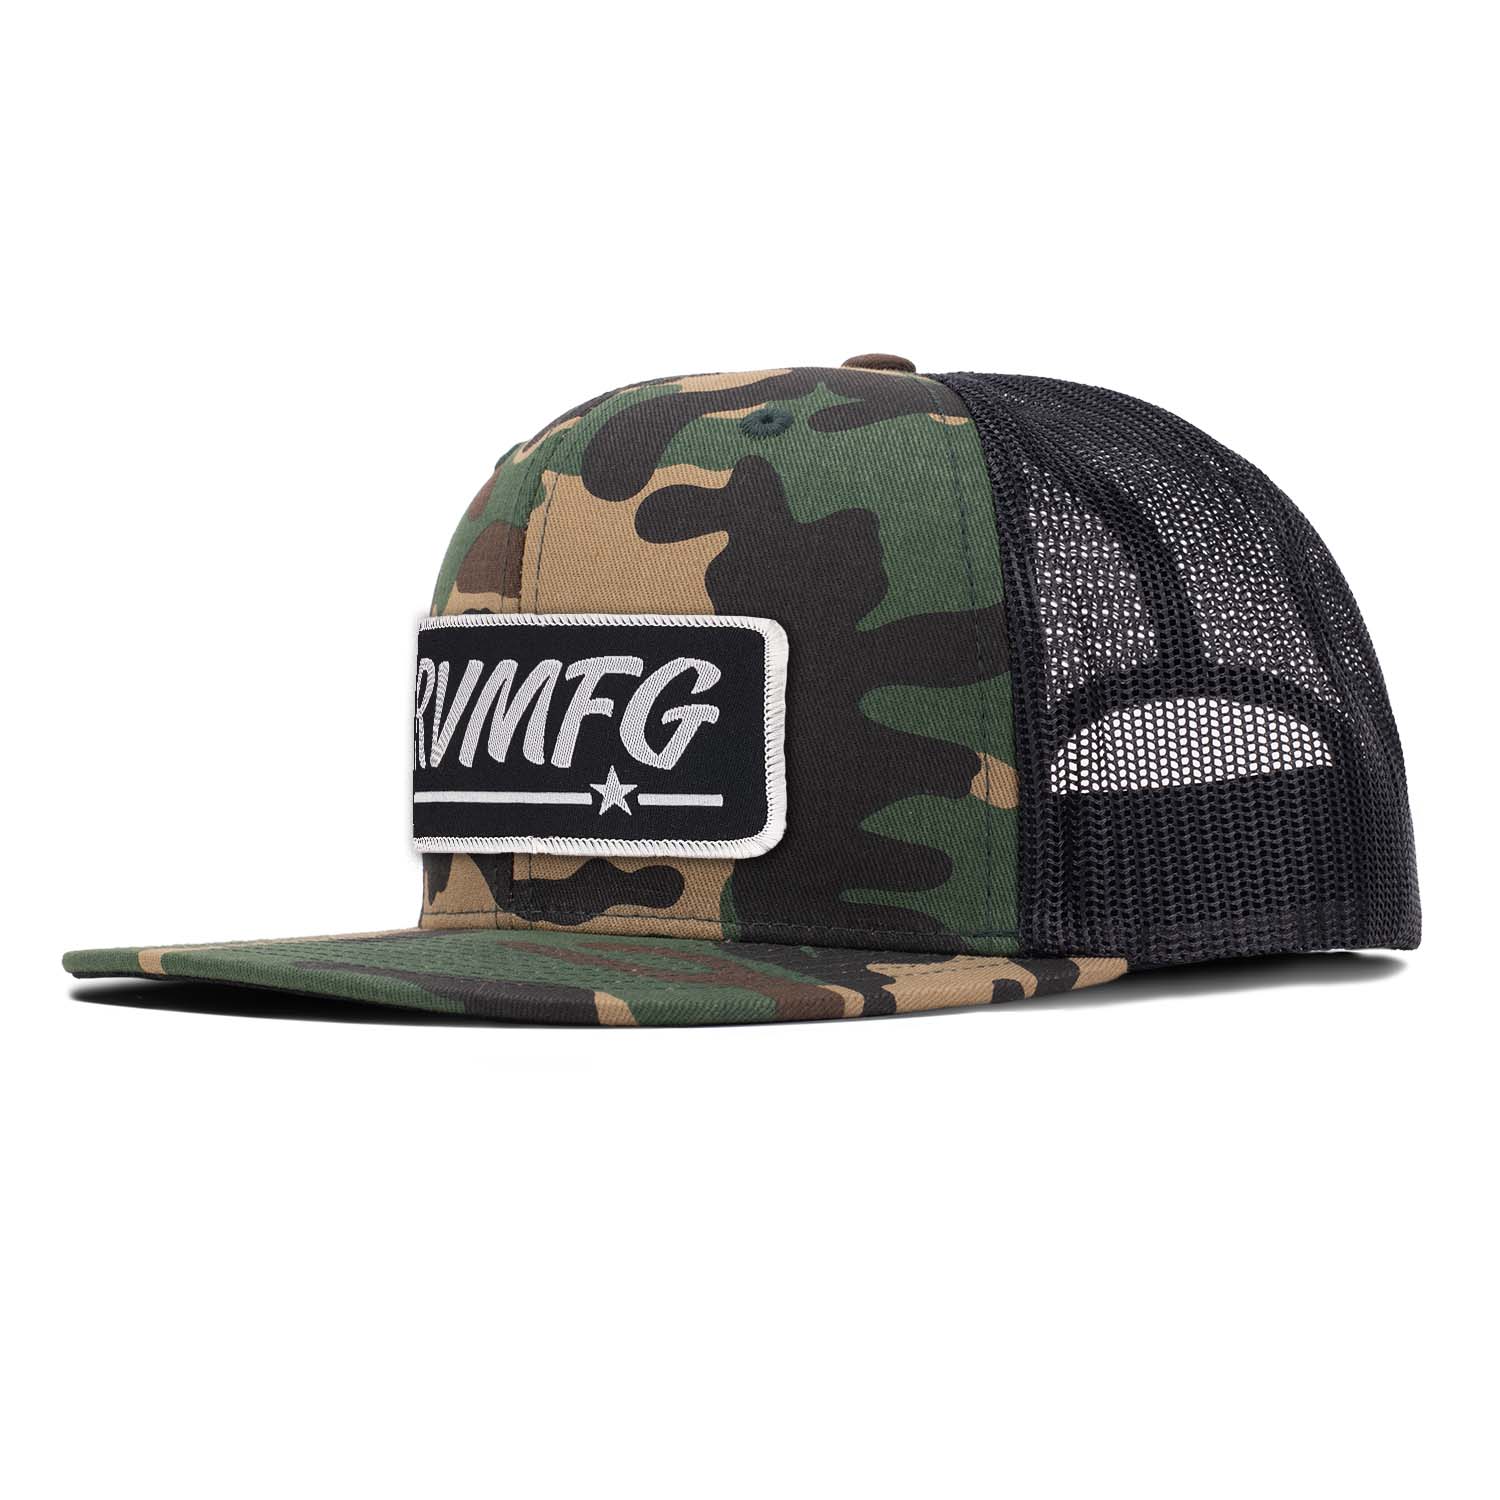 Revolution Mfg flat bill trucker hat in woodland camo with black mesh with a black RVMFG woven patch with white letters and a white border